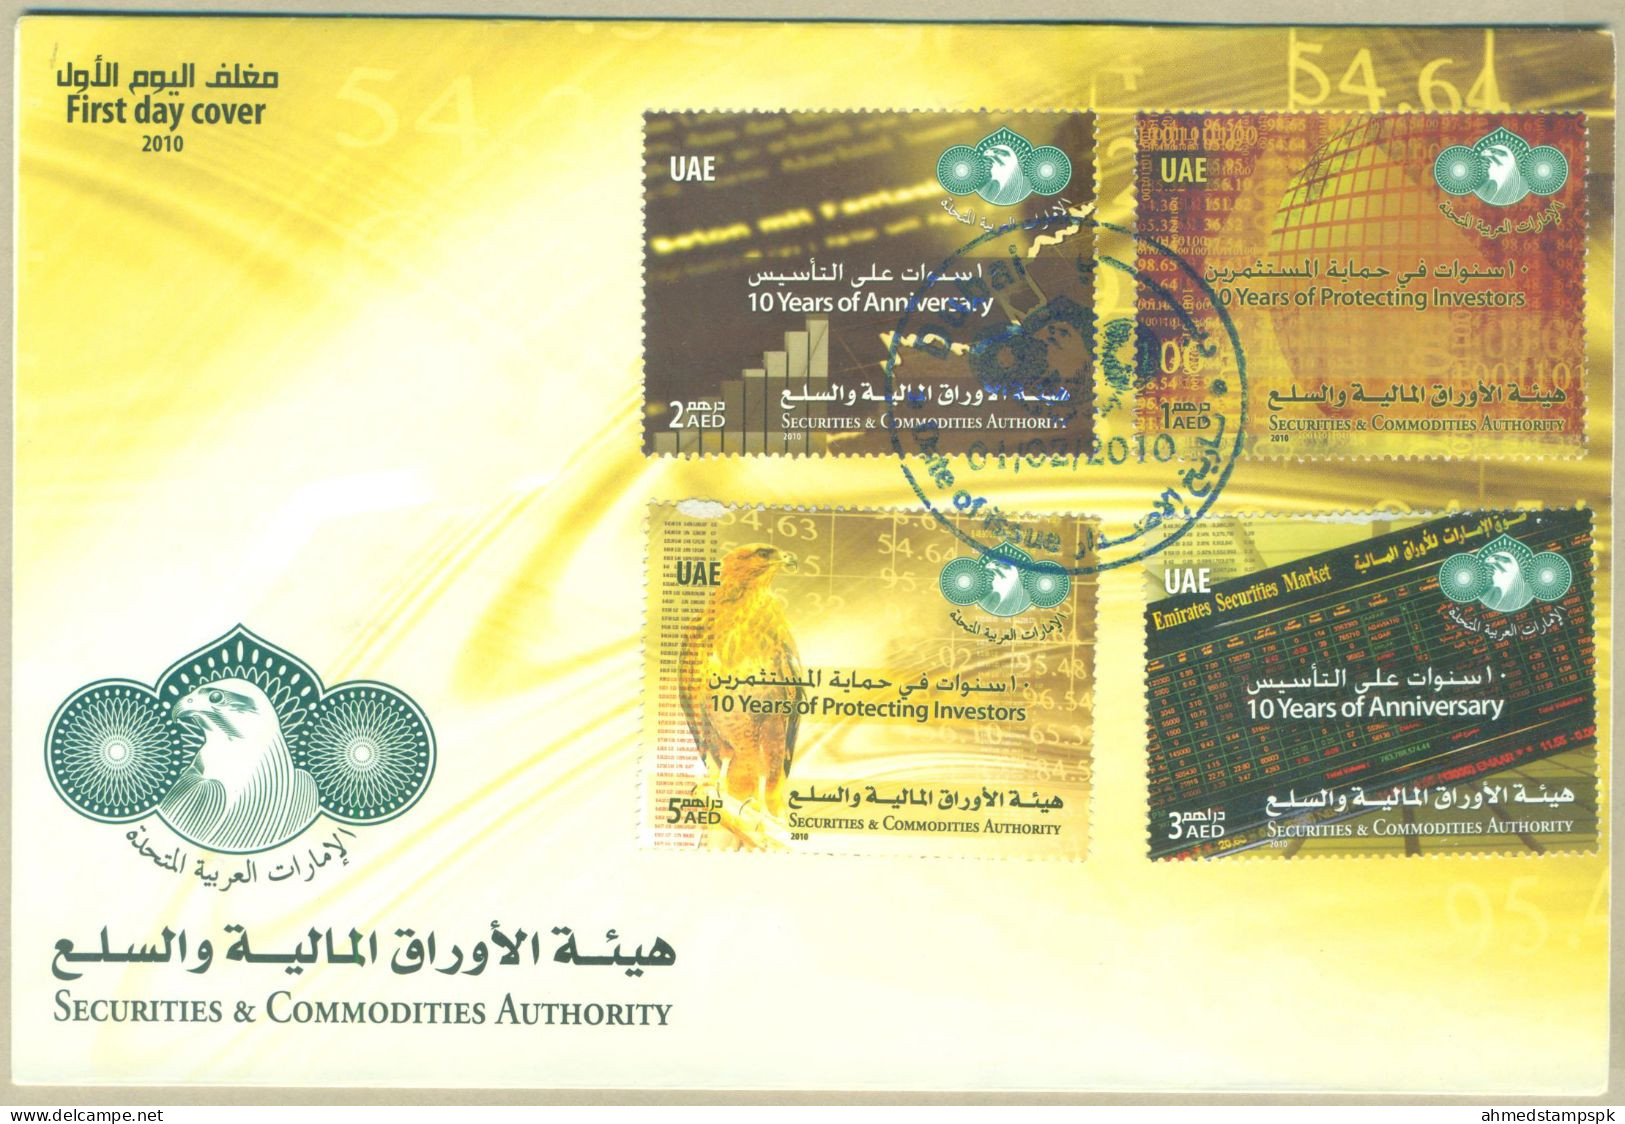 UAE UNITED ARAB EMIRATES FDC FIRST DAY COVER 2010 MNH SECURITIES AND COMMODITIES AUTHORITY - United Arab Emirates (General)